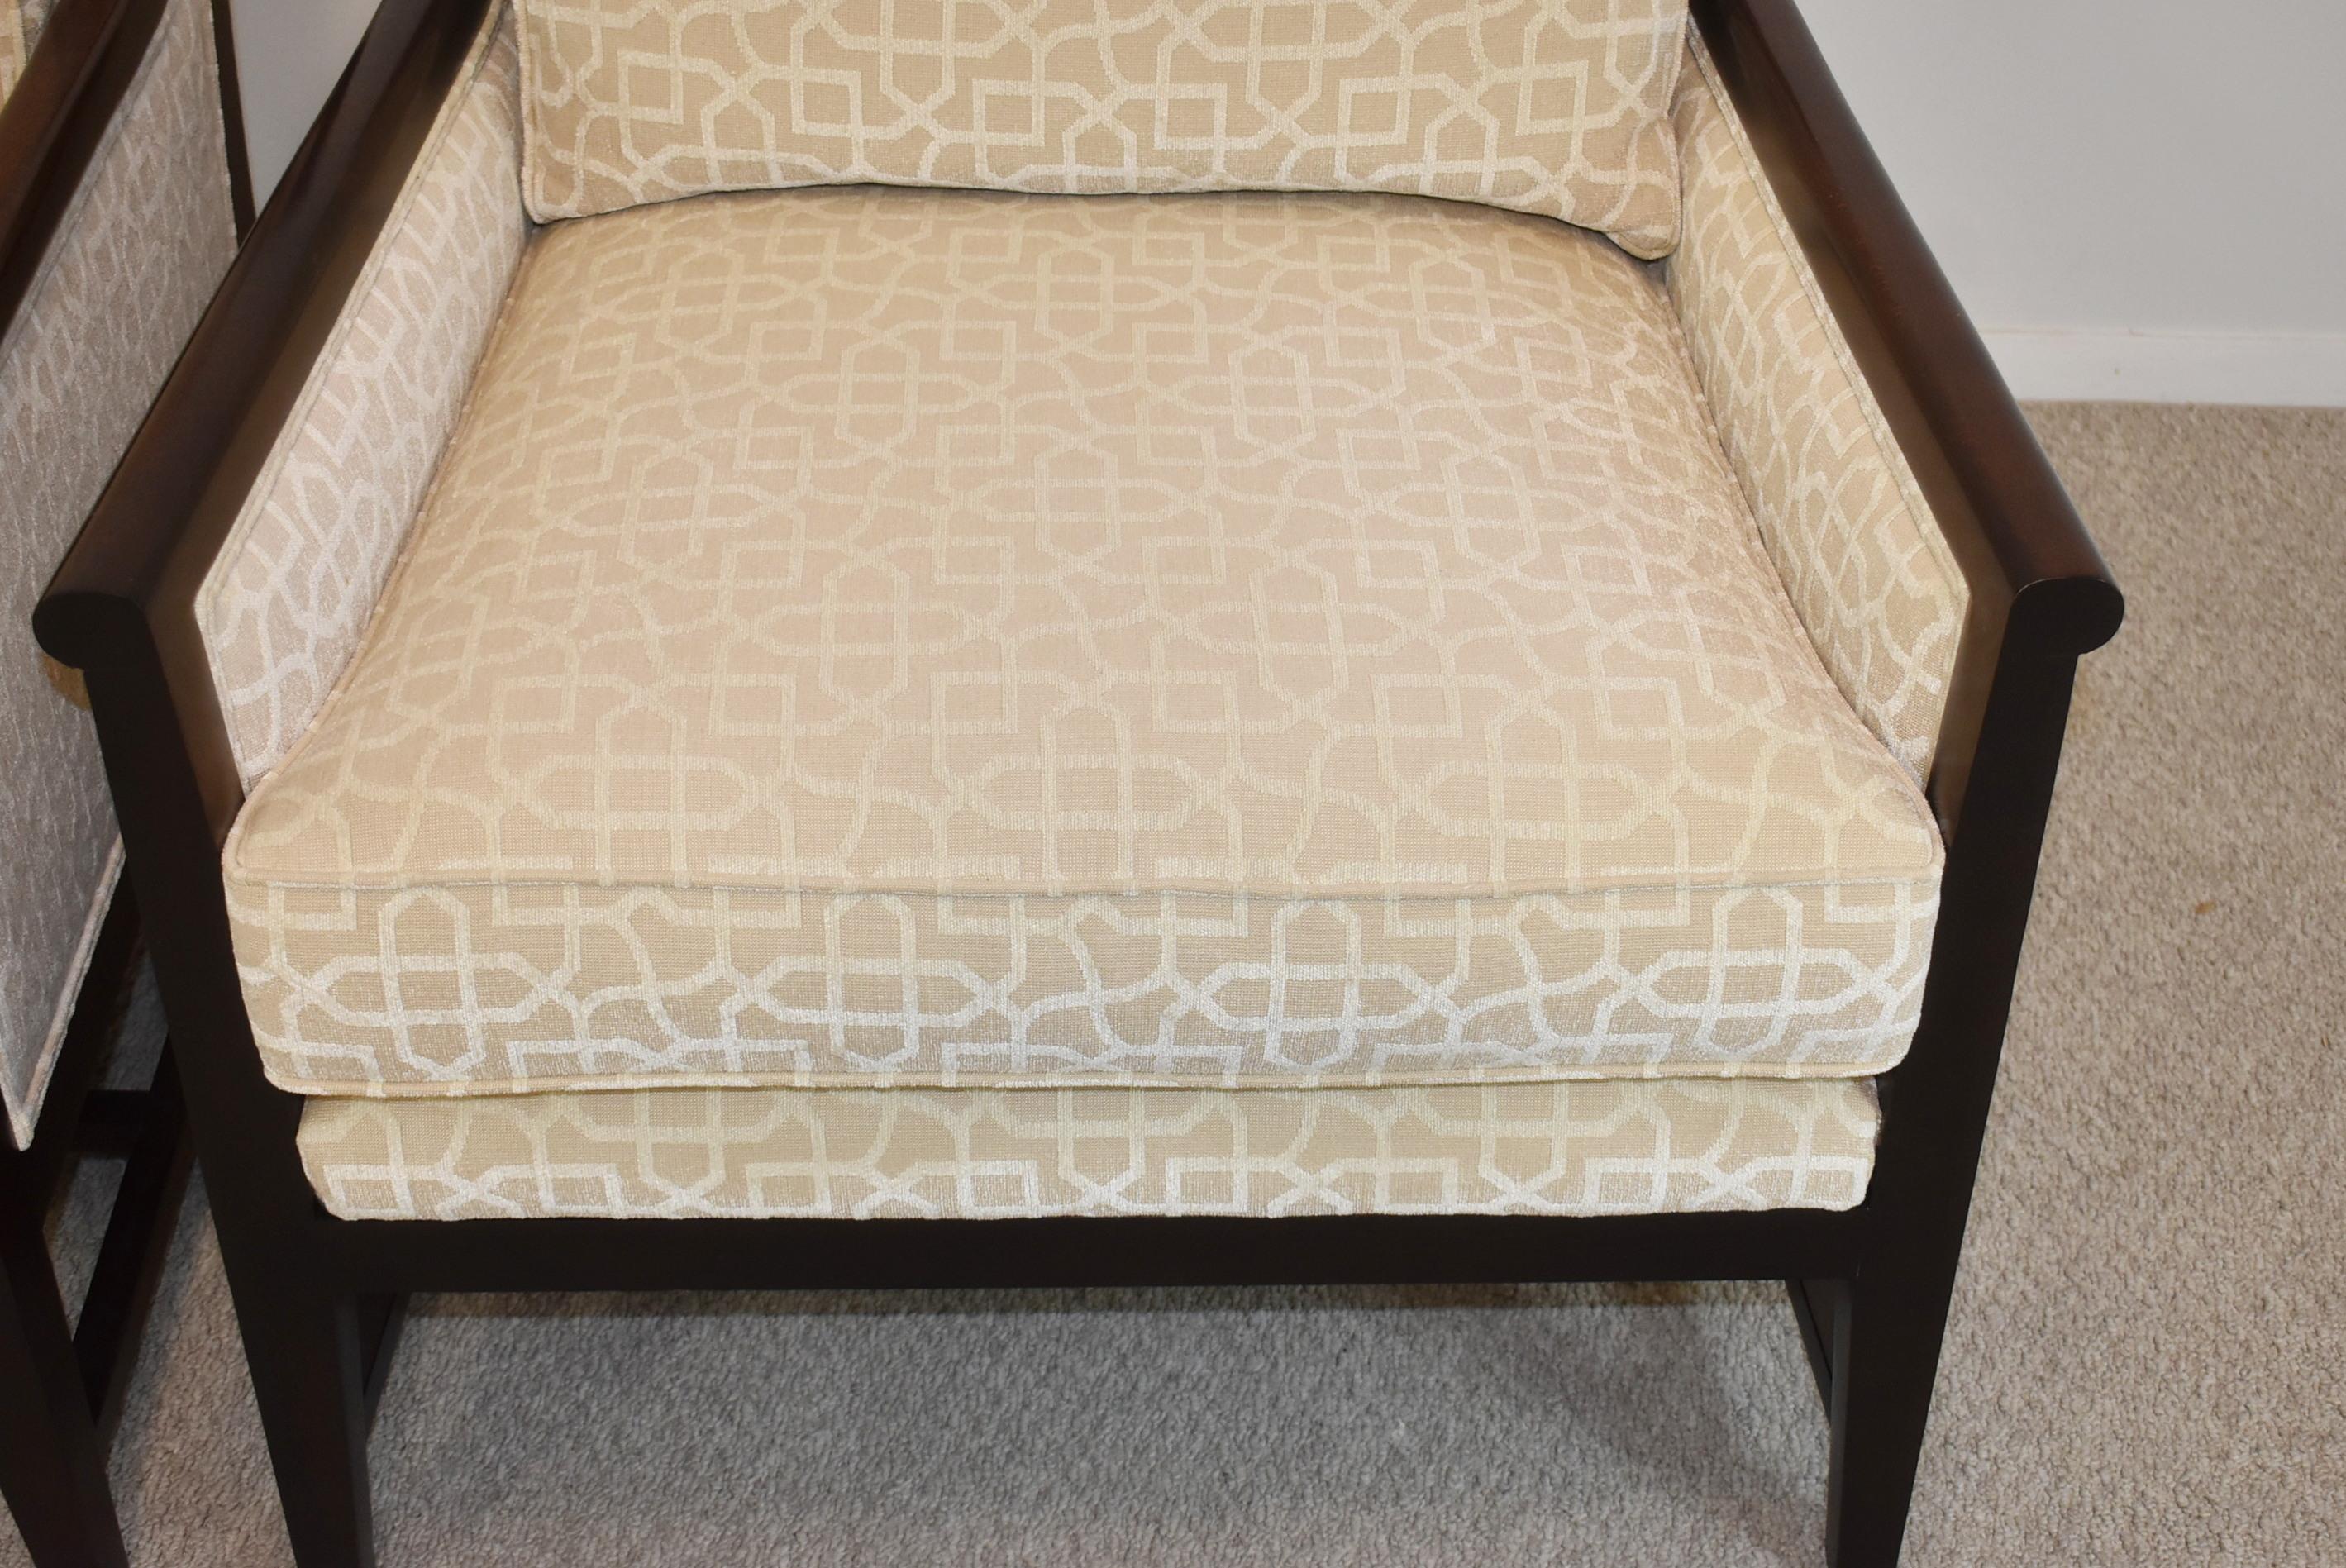 Pair cream tone on tone pattern upholstered lounge chairs by Henredon Acquisitions. Expresso finish frame having a solid cross stretcher base. Very comfortable. Excellent condition.